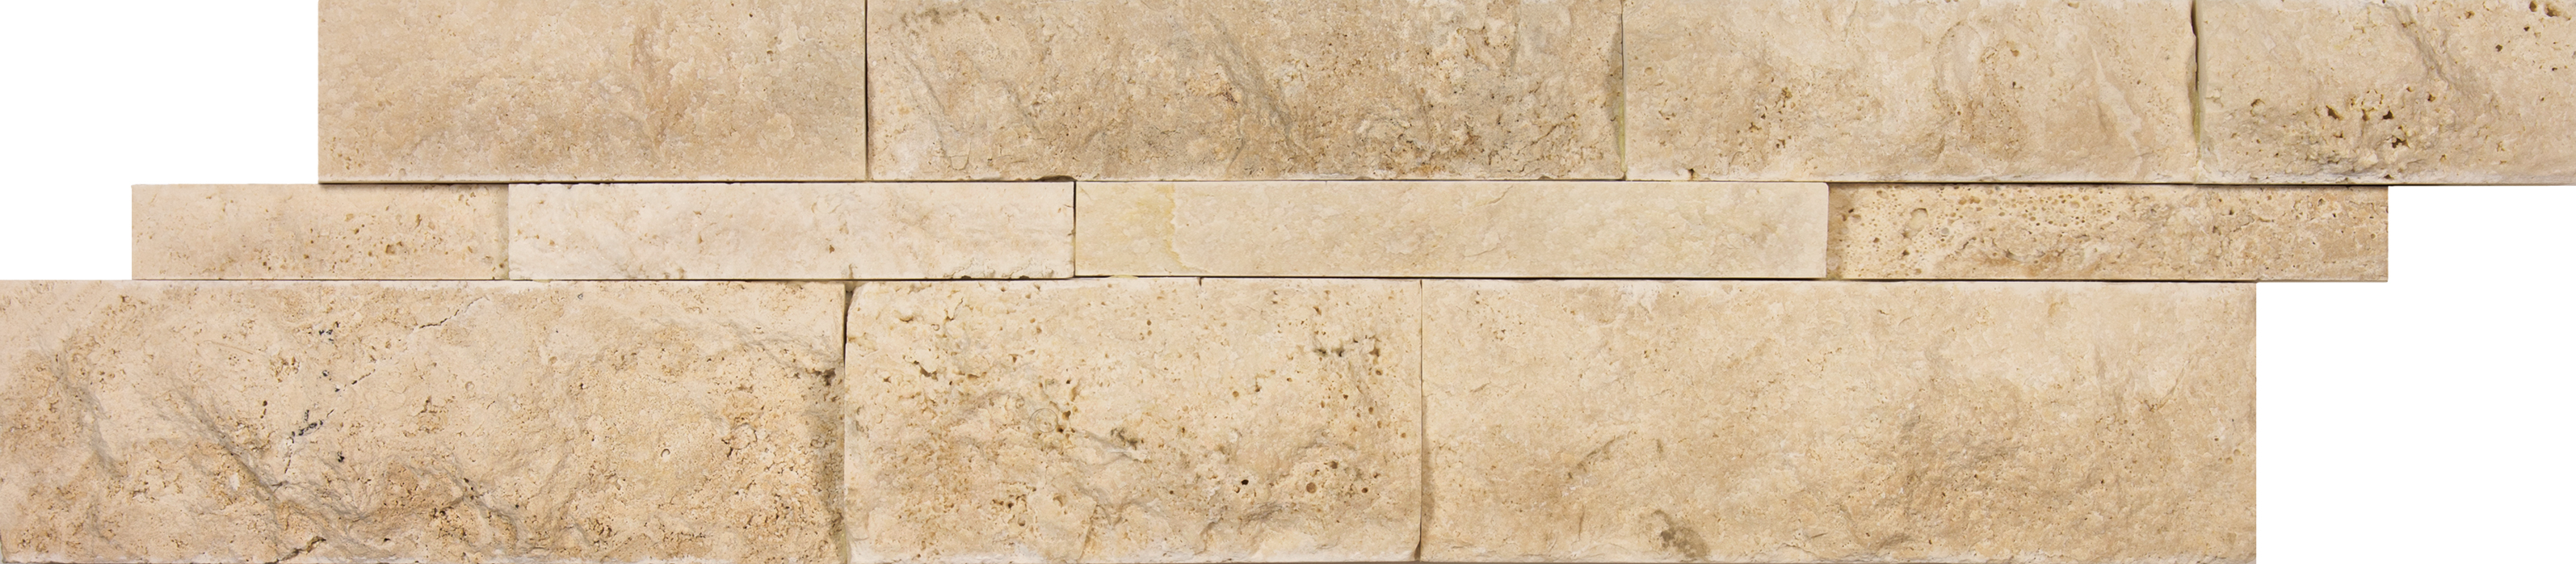 travertine siena avorio pattern natural stone wall panel from cubics anatolia collection distributed by surface group international split face finish straight edge edge 6x24 interlocking shape